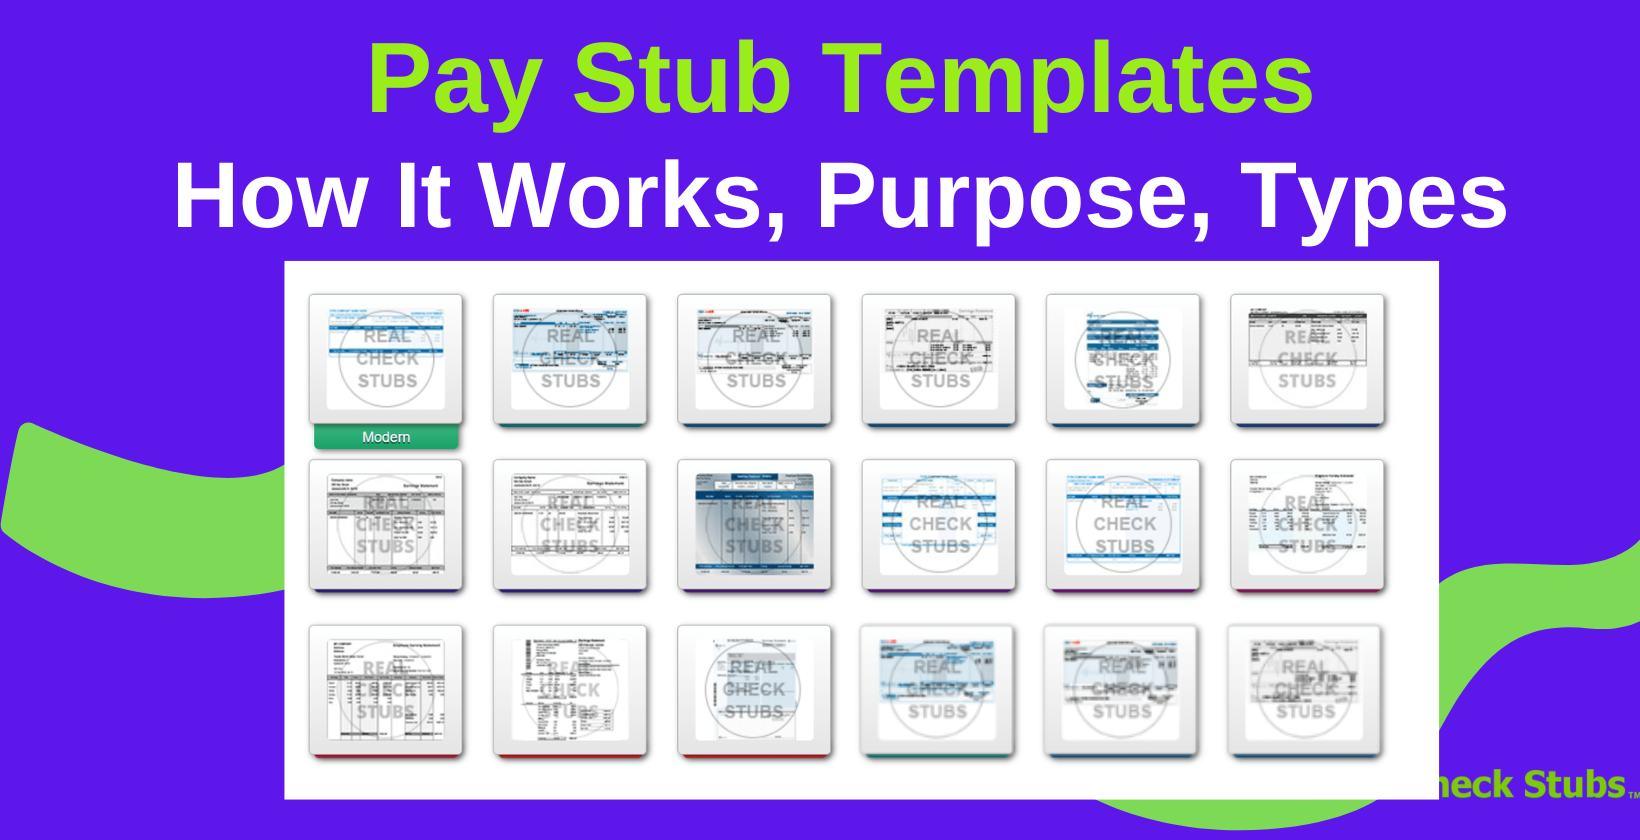 Pay Stub Templates: Definition, How It Works, Purpose, Types, Advantages and Disadvantages